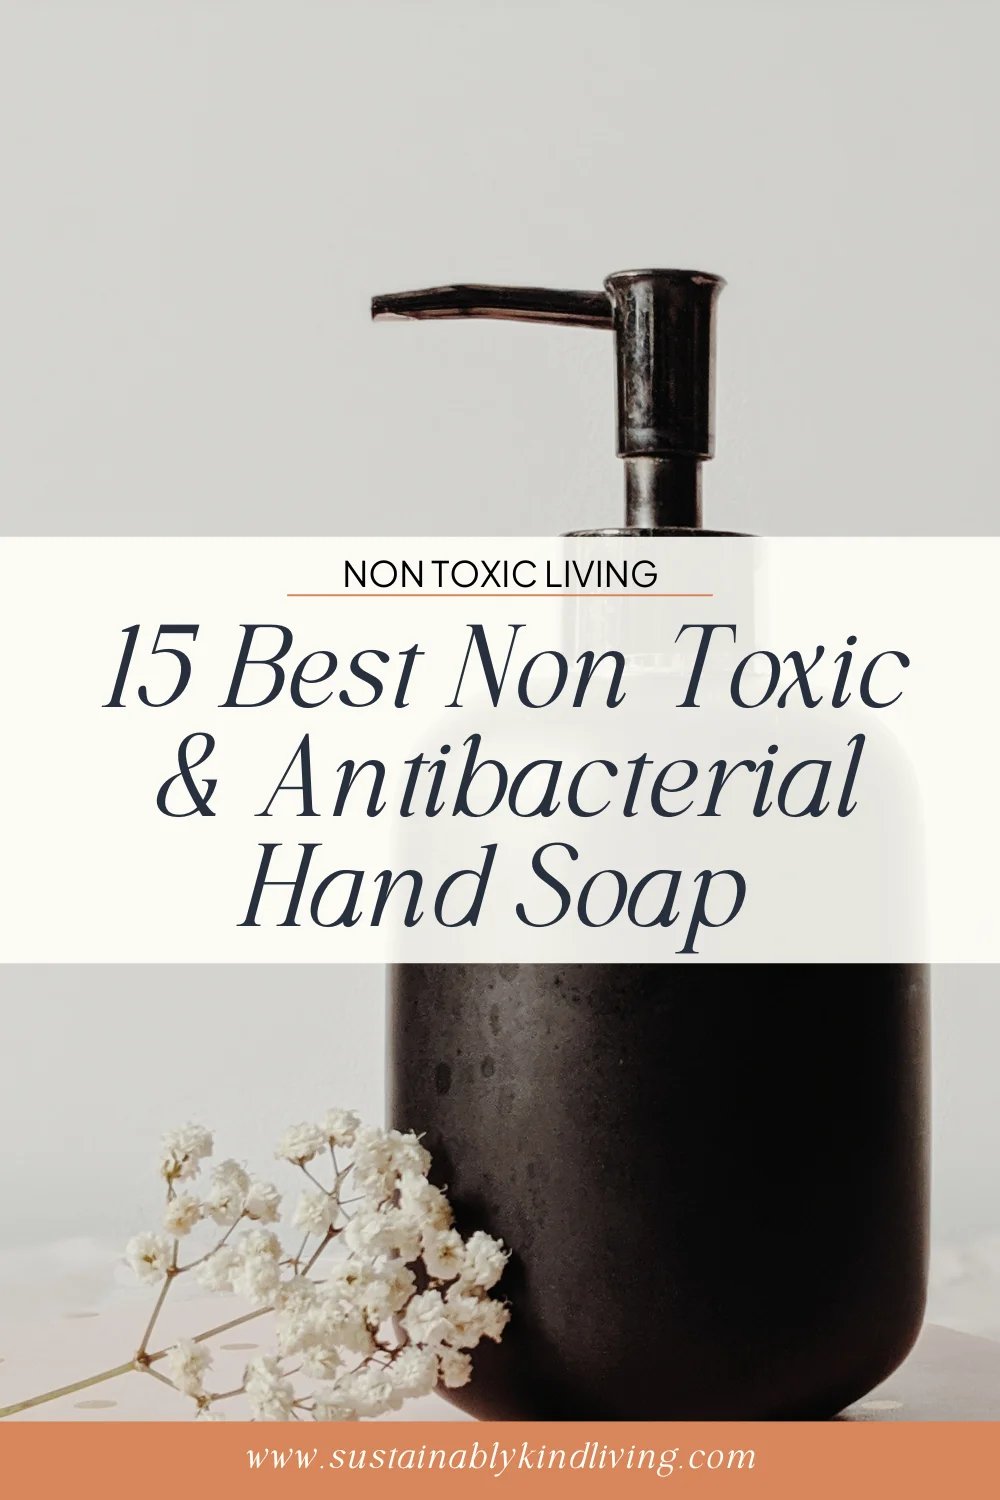 dermatologist-tested hand soap